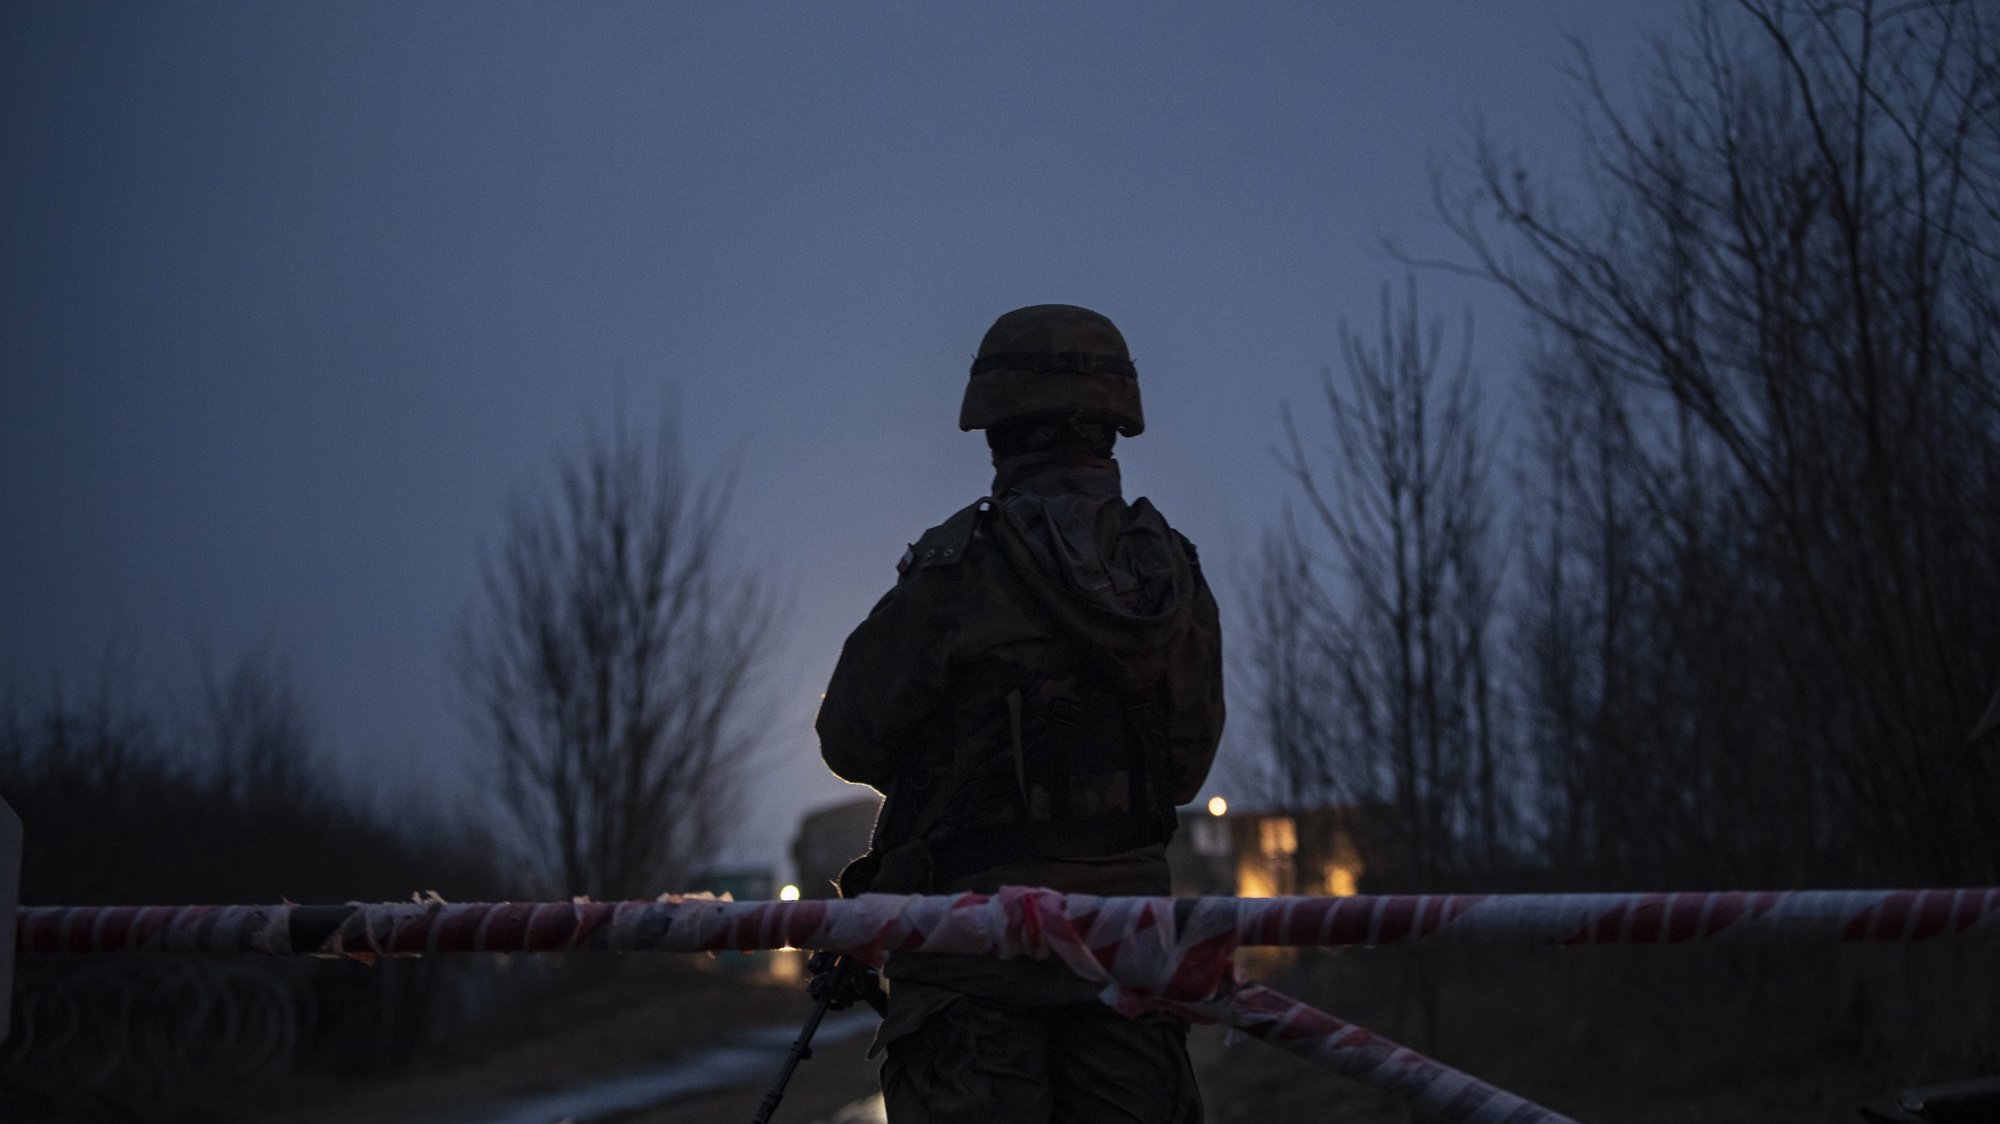 epa09623600 A soldier stands guard at the entrance to a temporary base outside the city of Michalowo, near the Polish-Belarusian border, eastern Poland, 16 November 2021. Poland has been struggling to stem the flow of asylum-seekers, refugees and migrants crossing into the country from Belarus. The Polish government said the migrants have been invited to Belarus by the Belarusian president, allegedly under the promise they will be able to live in the EU. Thousands of people who want to obtain asylum in the European Union have been trapped at low temperatures at the border since 08 November.  EPA/MARTIN DIVISEK